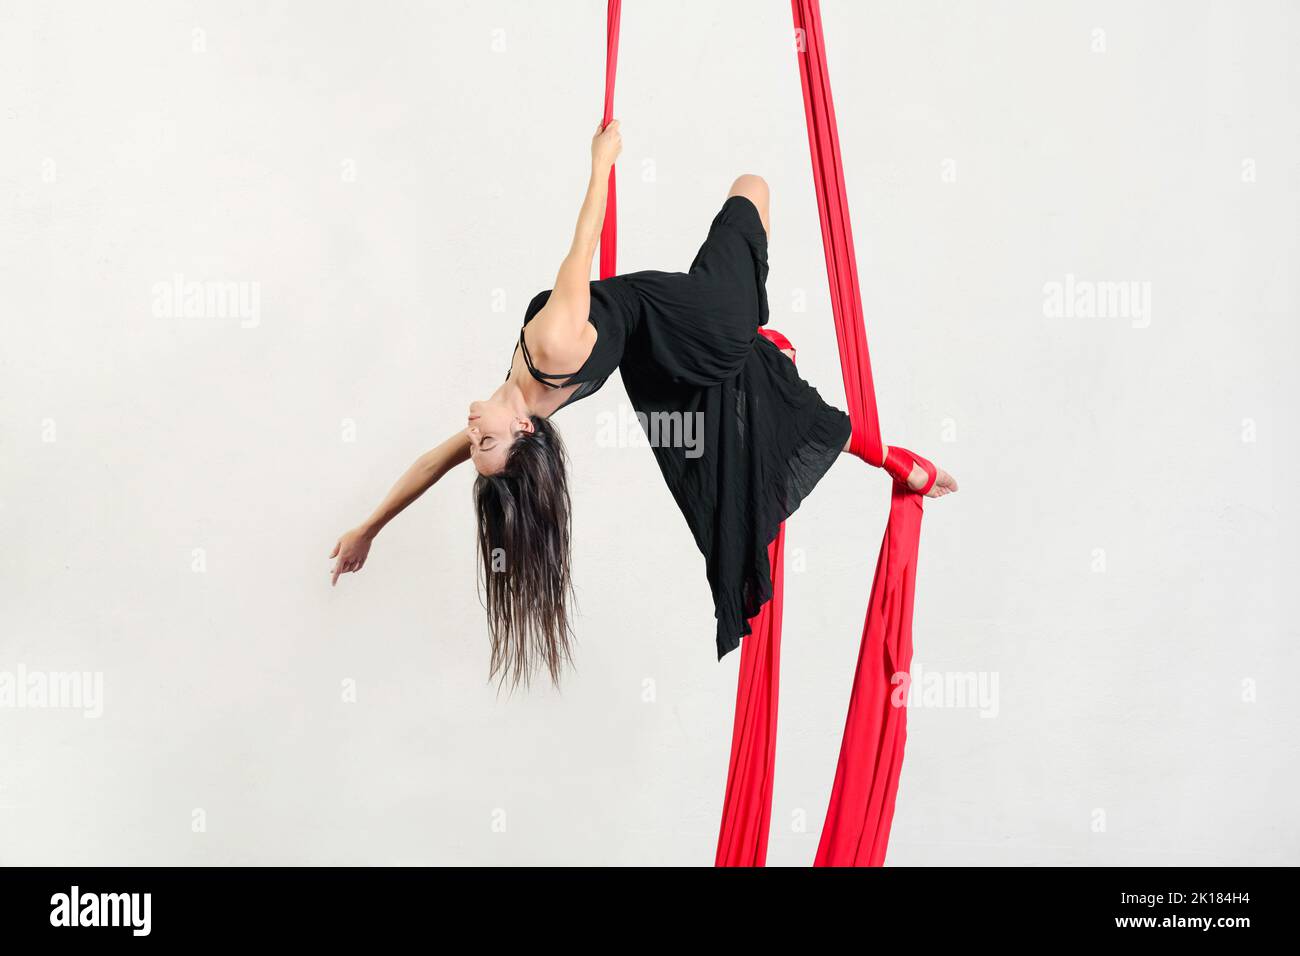 Full body barefoot woman in black dress closing eyes and bending back while hanging on red aerial silks against gray background Stock Photo